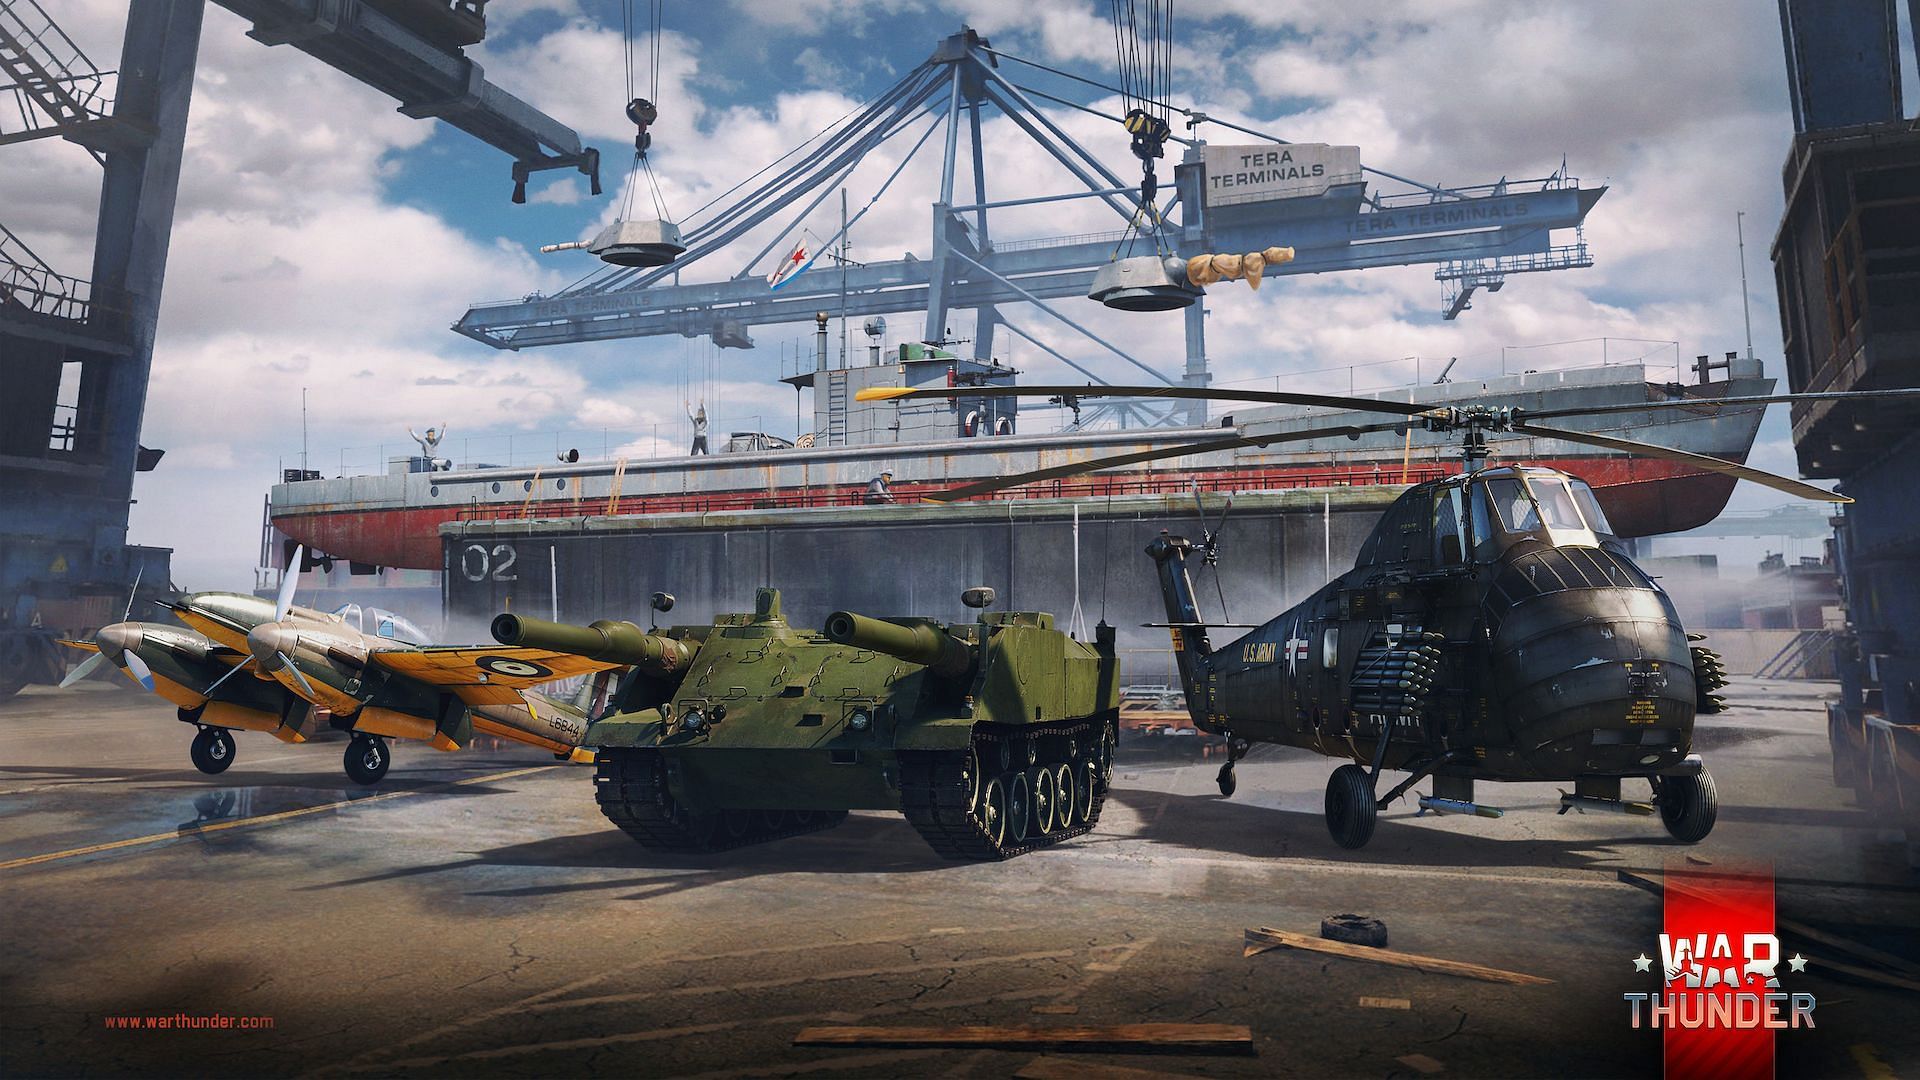 Tank, Helicopter, Plane and a Ship standing in a shipyard in War Thunder.